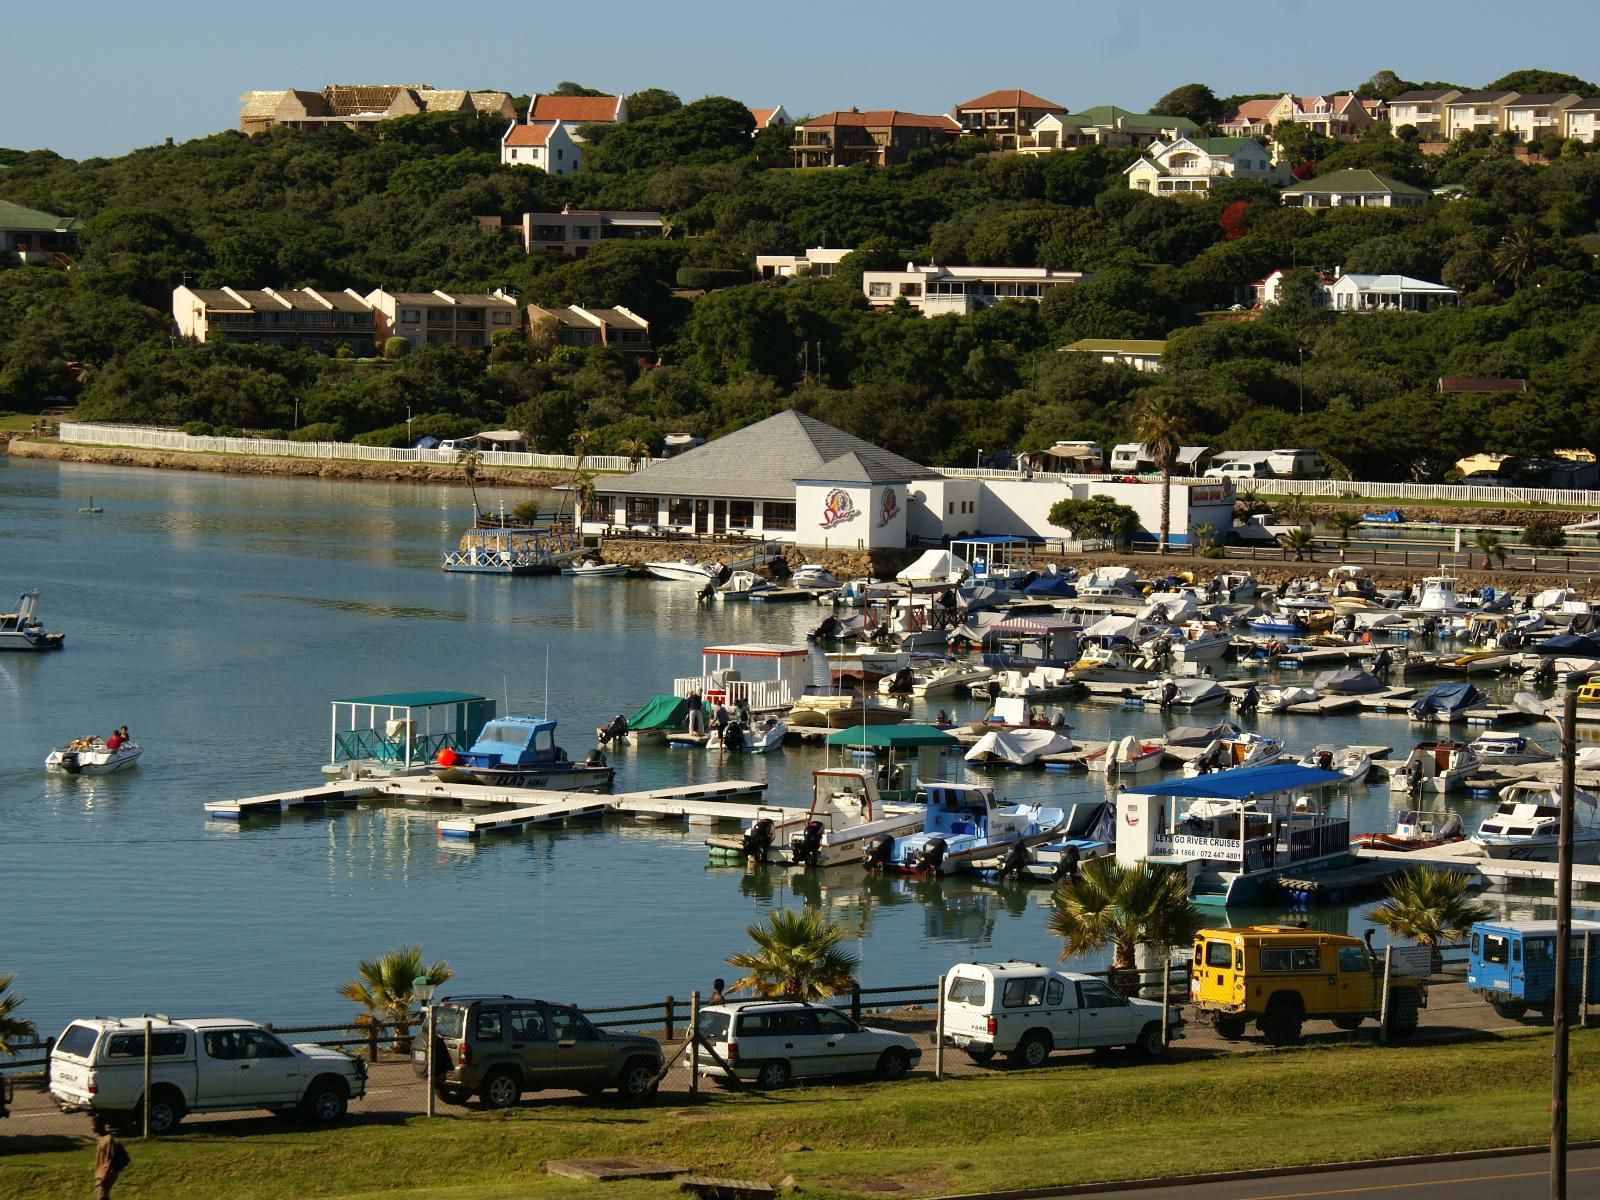 Dockside Guest House Port Alfred Eastern Cape South Africa Beach, Nature, Sand, Harbor, Waters, City, Architecture, Building, Car, Vehicle